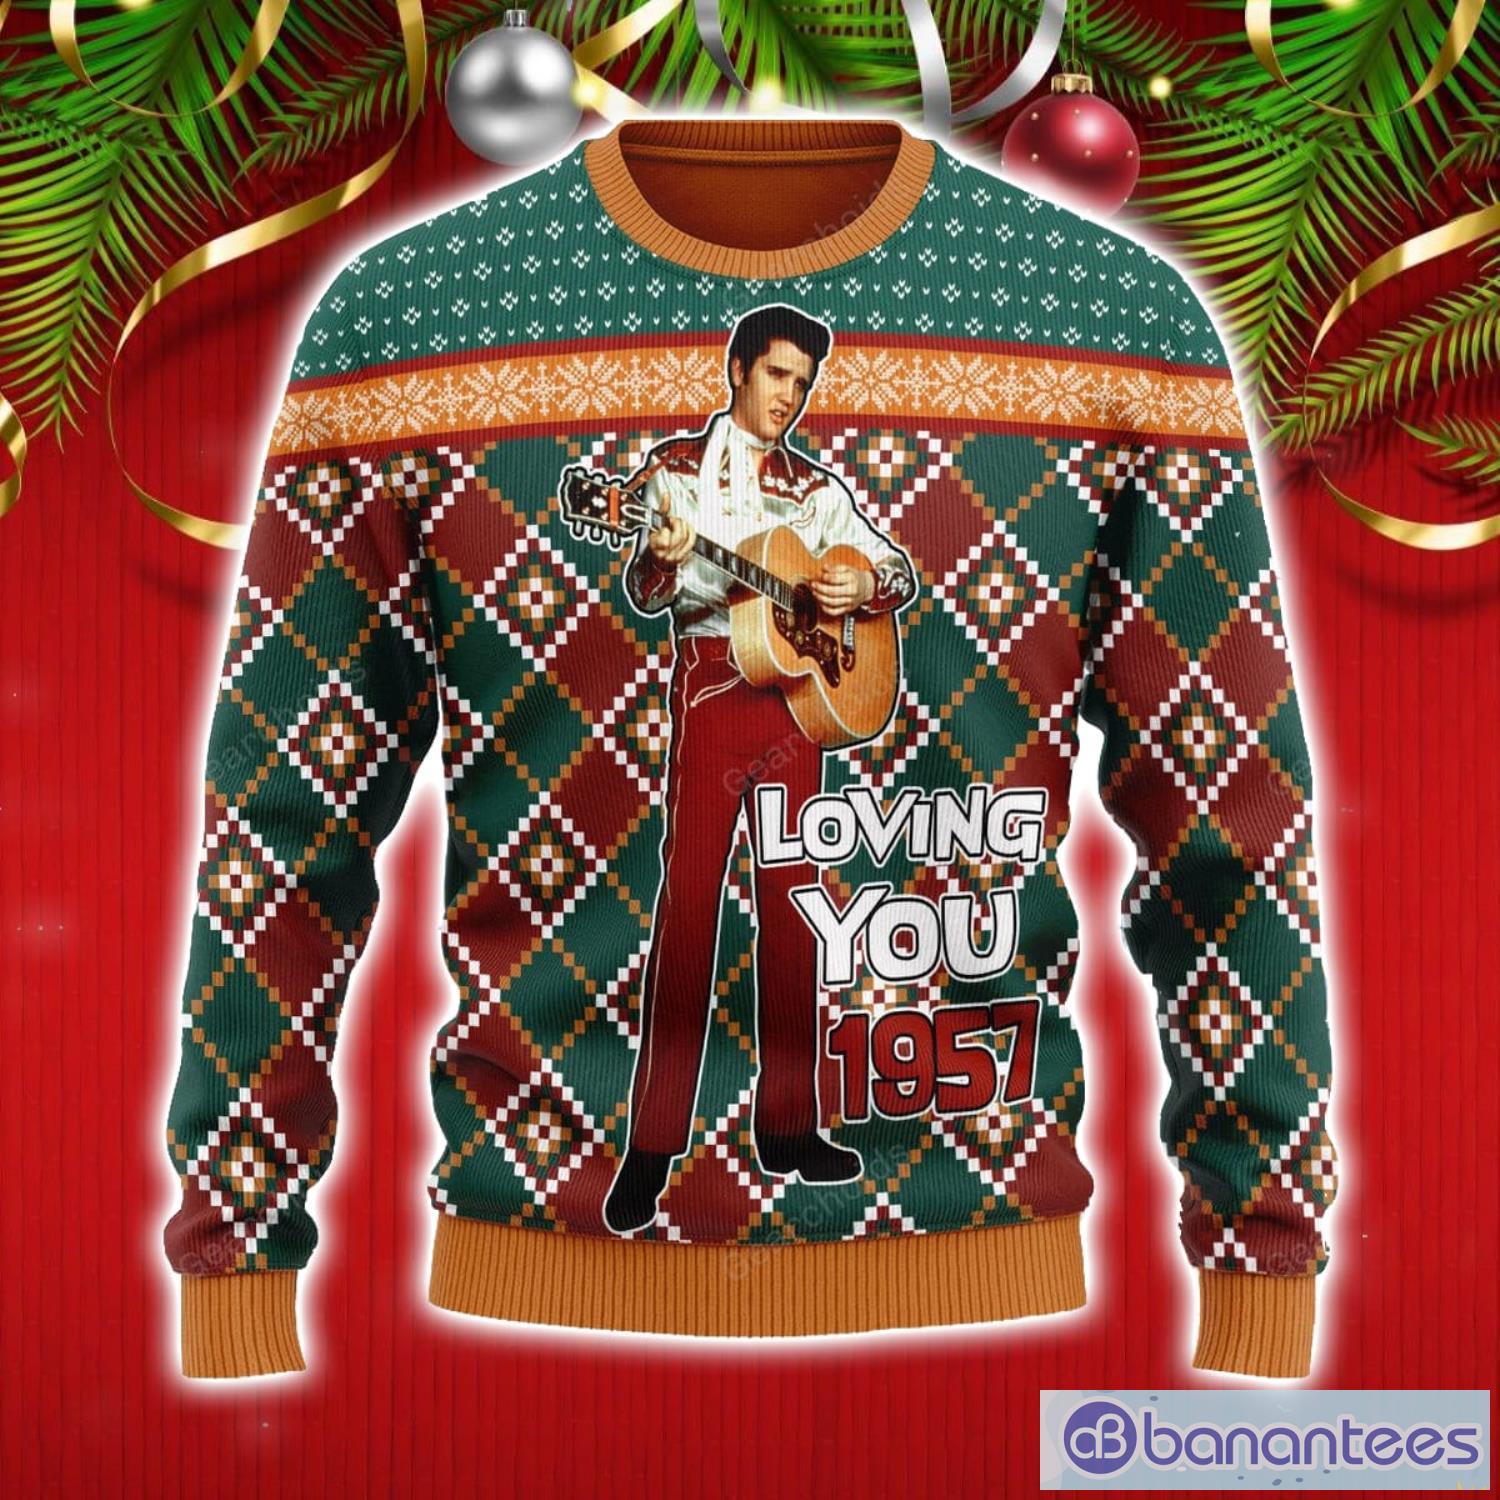 https://image.banantees.com/2023/10/elvis-loving-you-1957-christmas-ugly-sweater-all-over-printed-sweater-christmas-gift.jpg